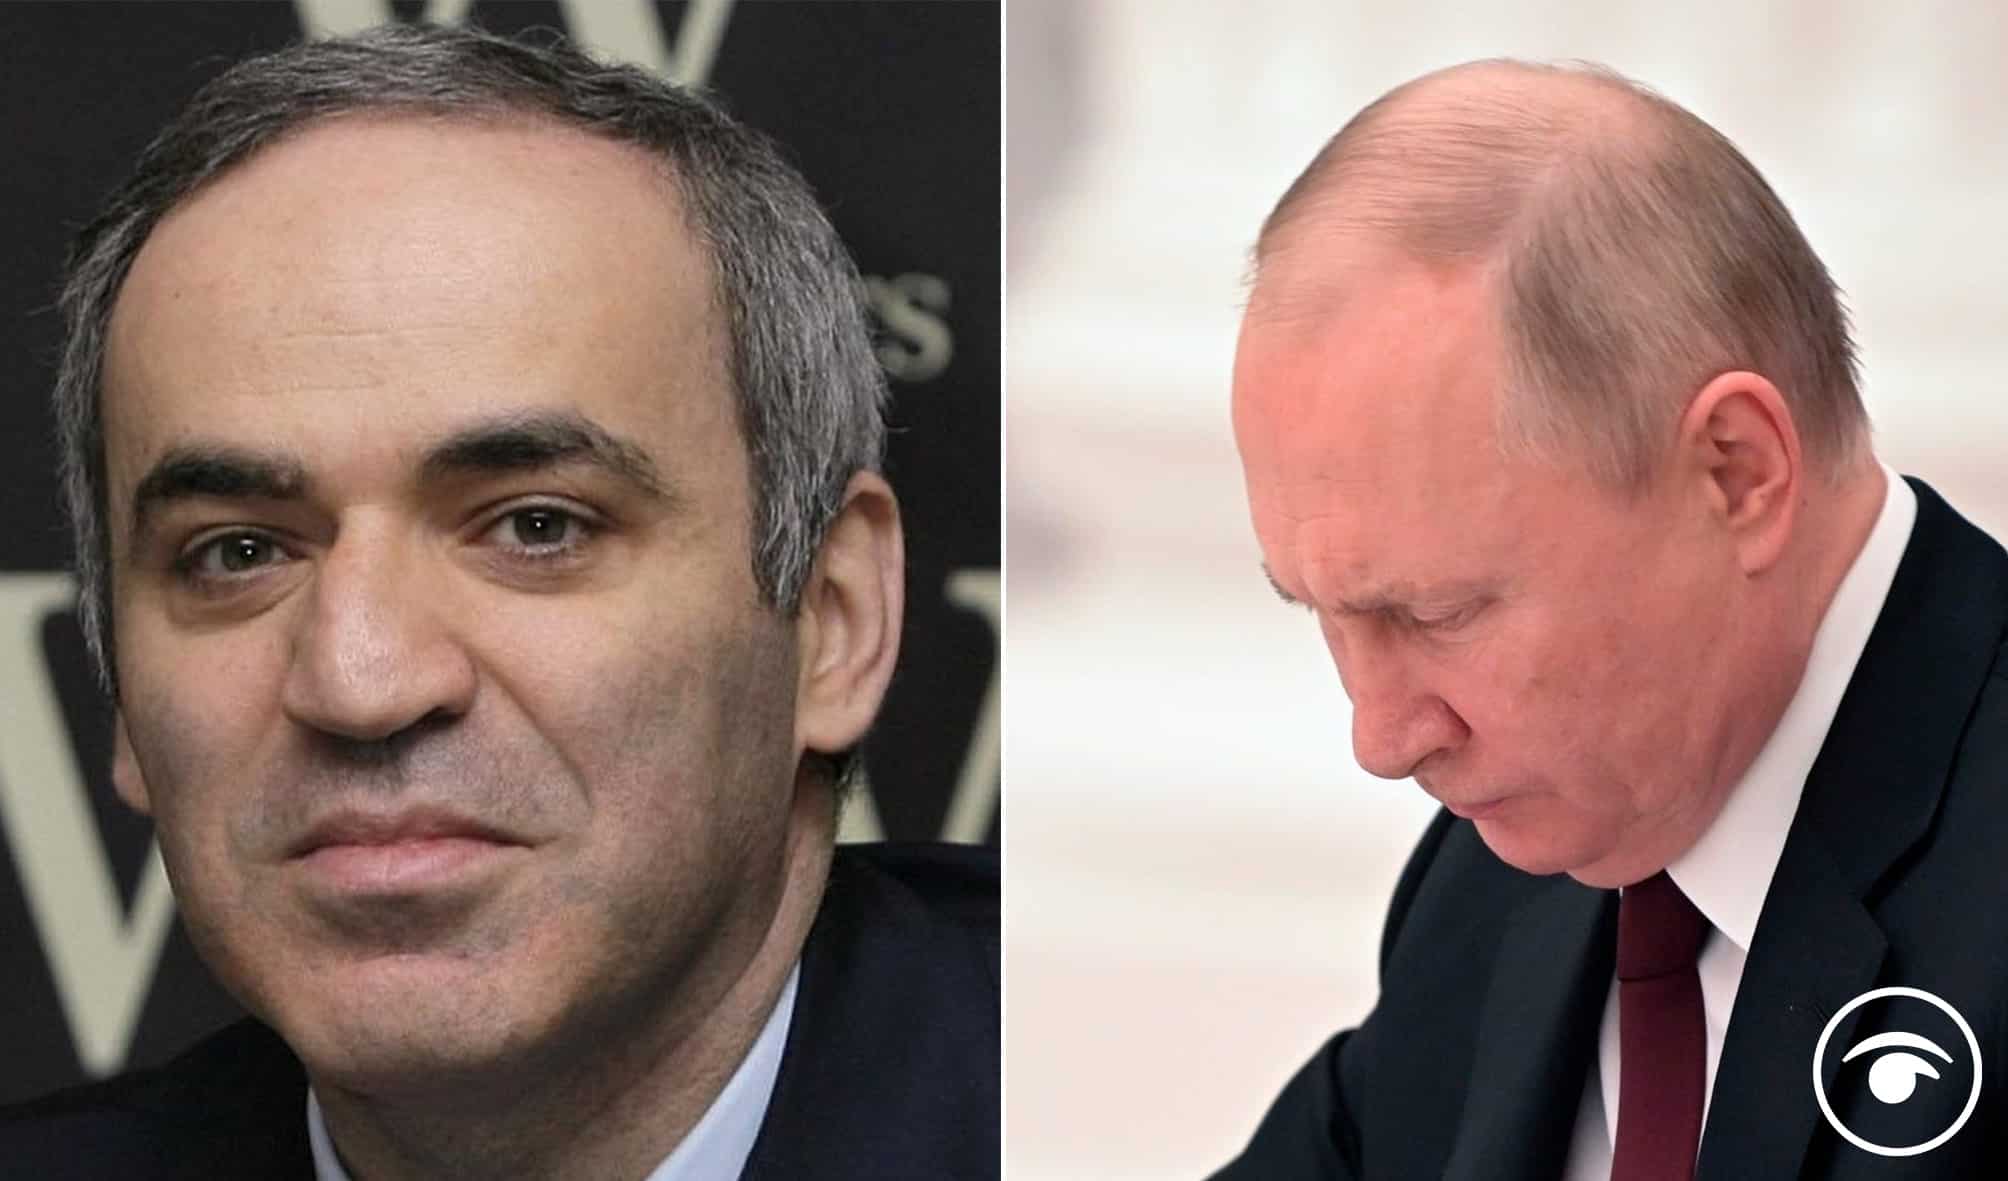 Chess grandmaster Garry Kasparov’s thread on recommendations to deal with Putin’s aggression is a must read